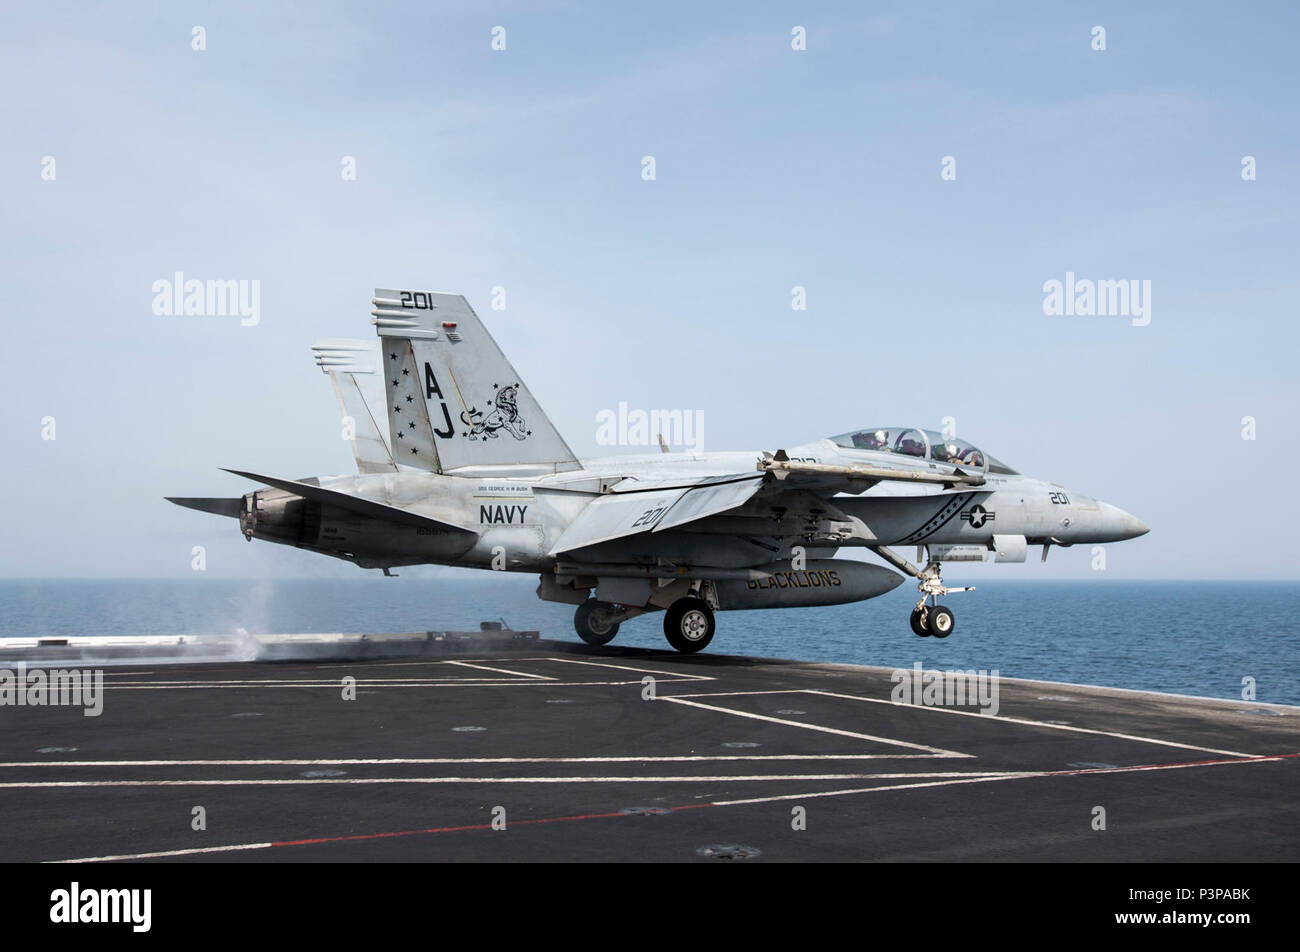 ARABIAN GULF (May 7, 2017) Capt. James McCall III, commander, Carrier Air Wing 8, and Cmdr. Kevin Robb, commanding officer of the 'Blacklions' of Strike Fighter Squadron (VFA) 213, launch from the aircraft carrier USS George H.W. Bush (CVN 77) in an F/A-18F Super Hornet. The ship is deployed to the U.S. 5th Fleet area of operations in support of maritime security operations designed to reassure allies and partners, and preserve the freedom of navigation and the free flow of commerce in the region. Stock Photo